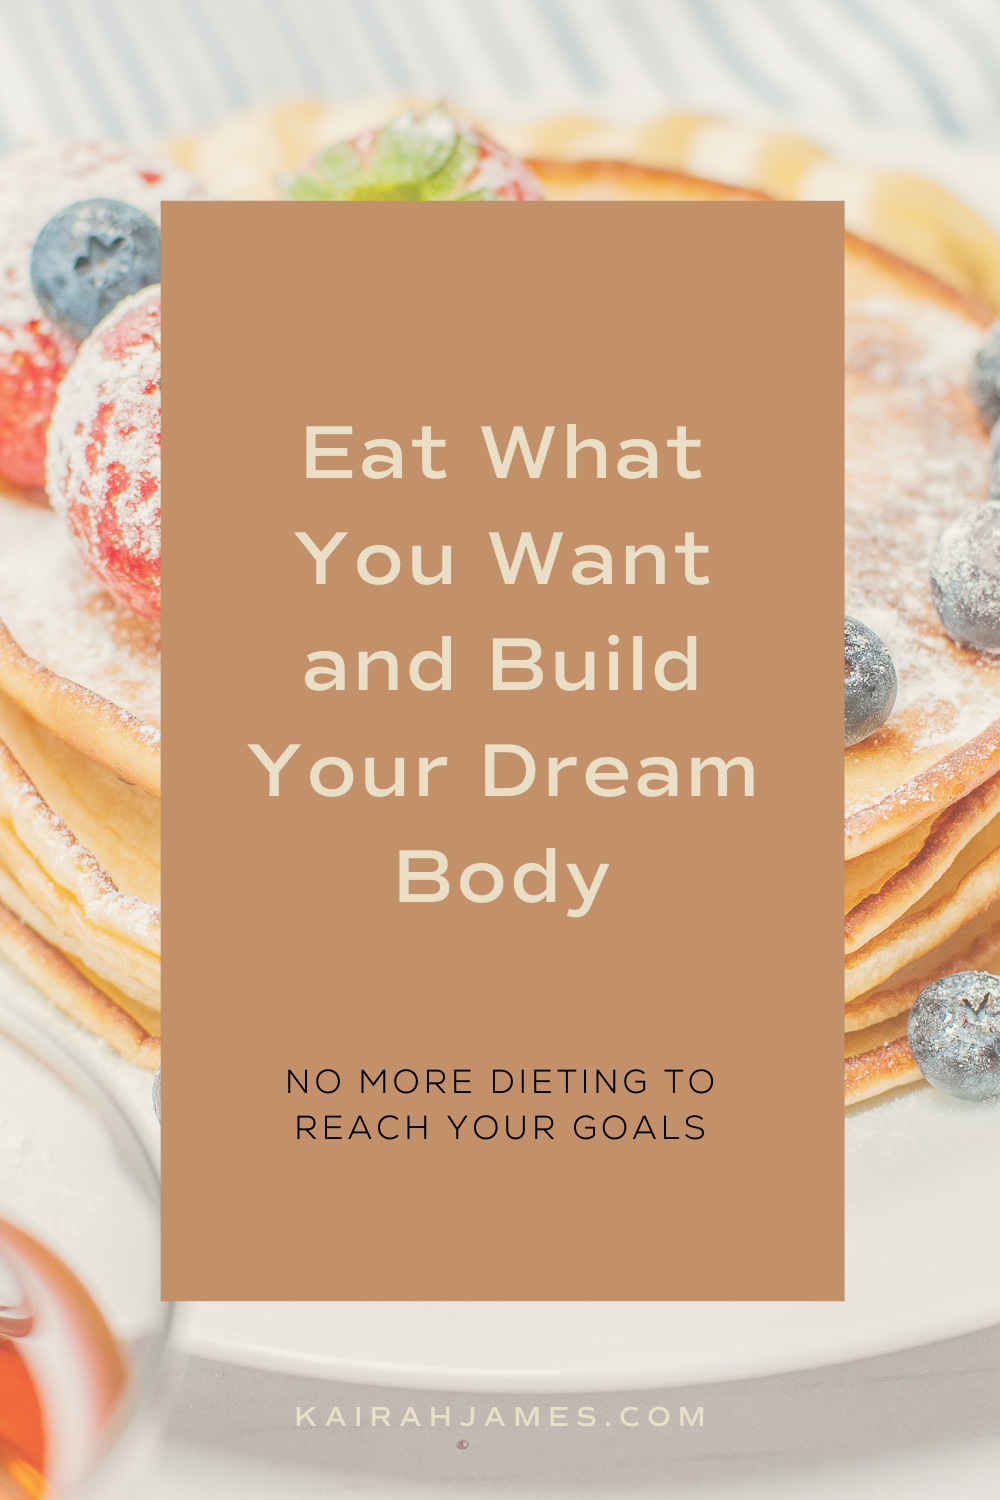 Eat What You Want and Build Your Dream Body